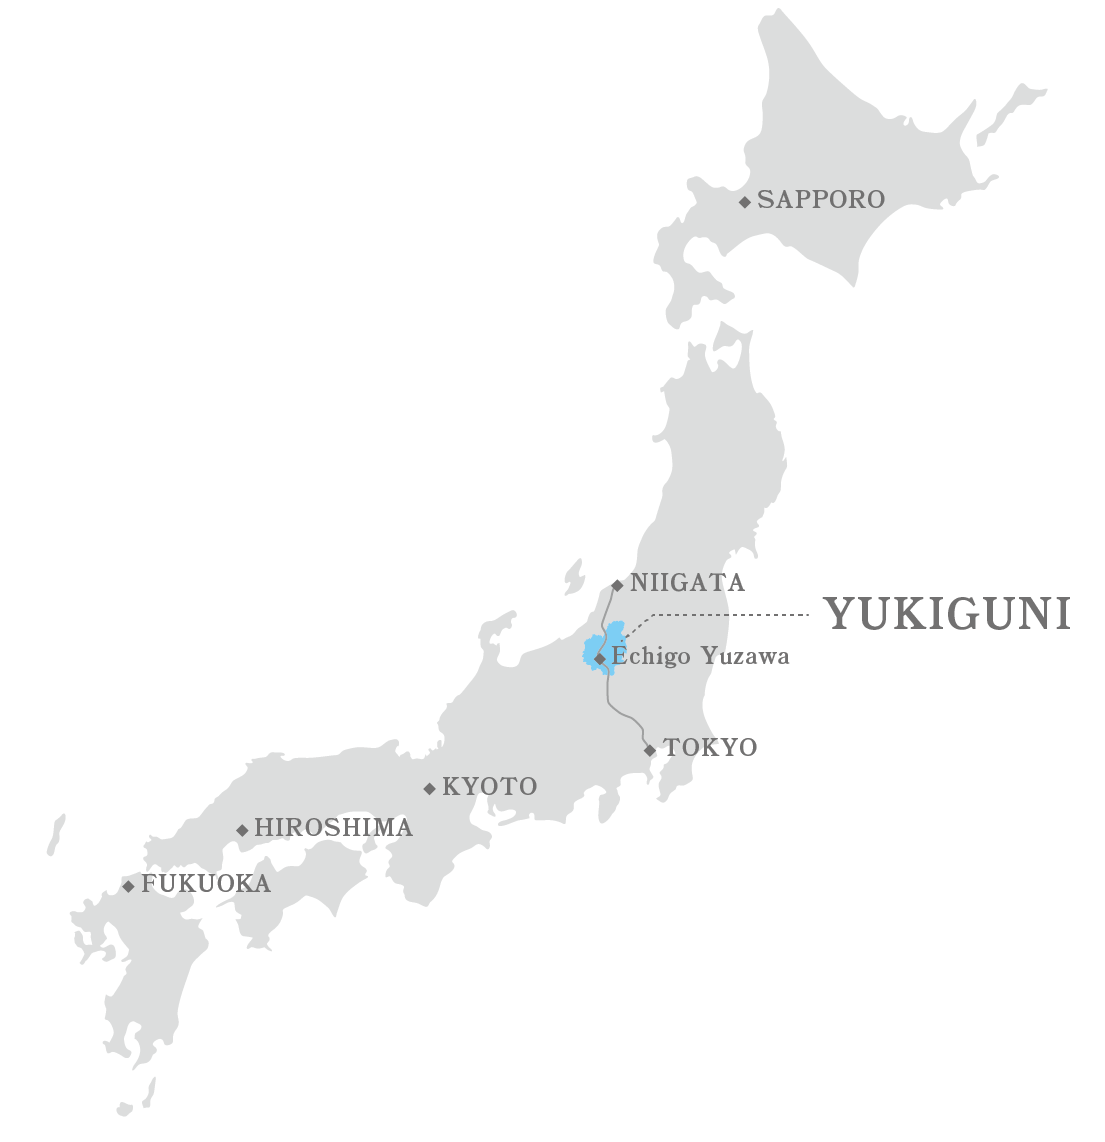 Access map from Tokyo to YUKIGUNI